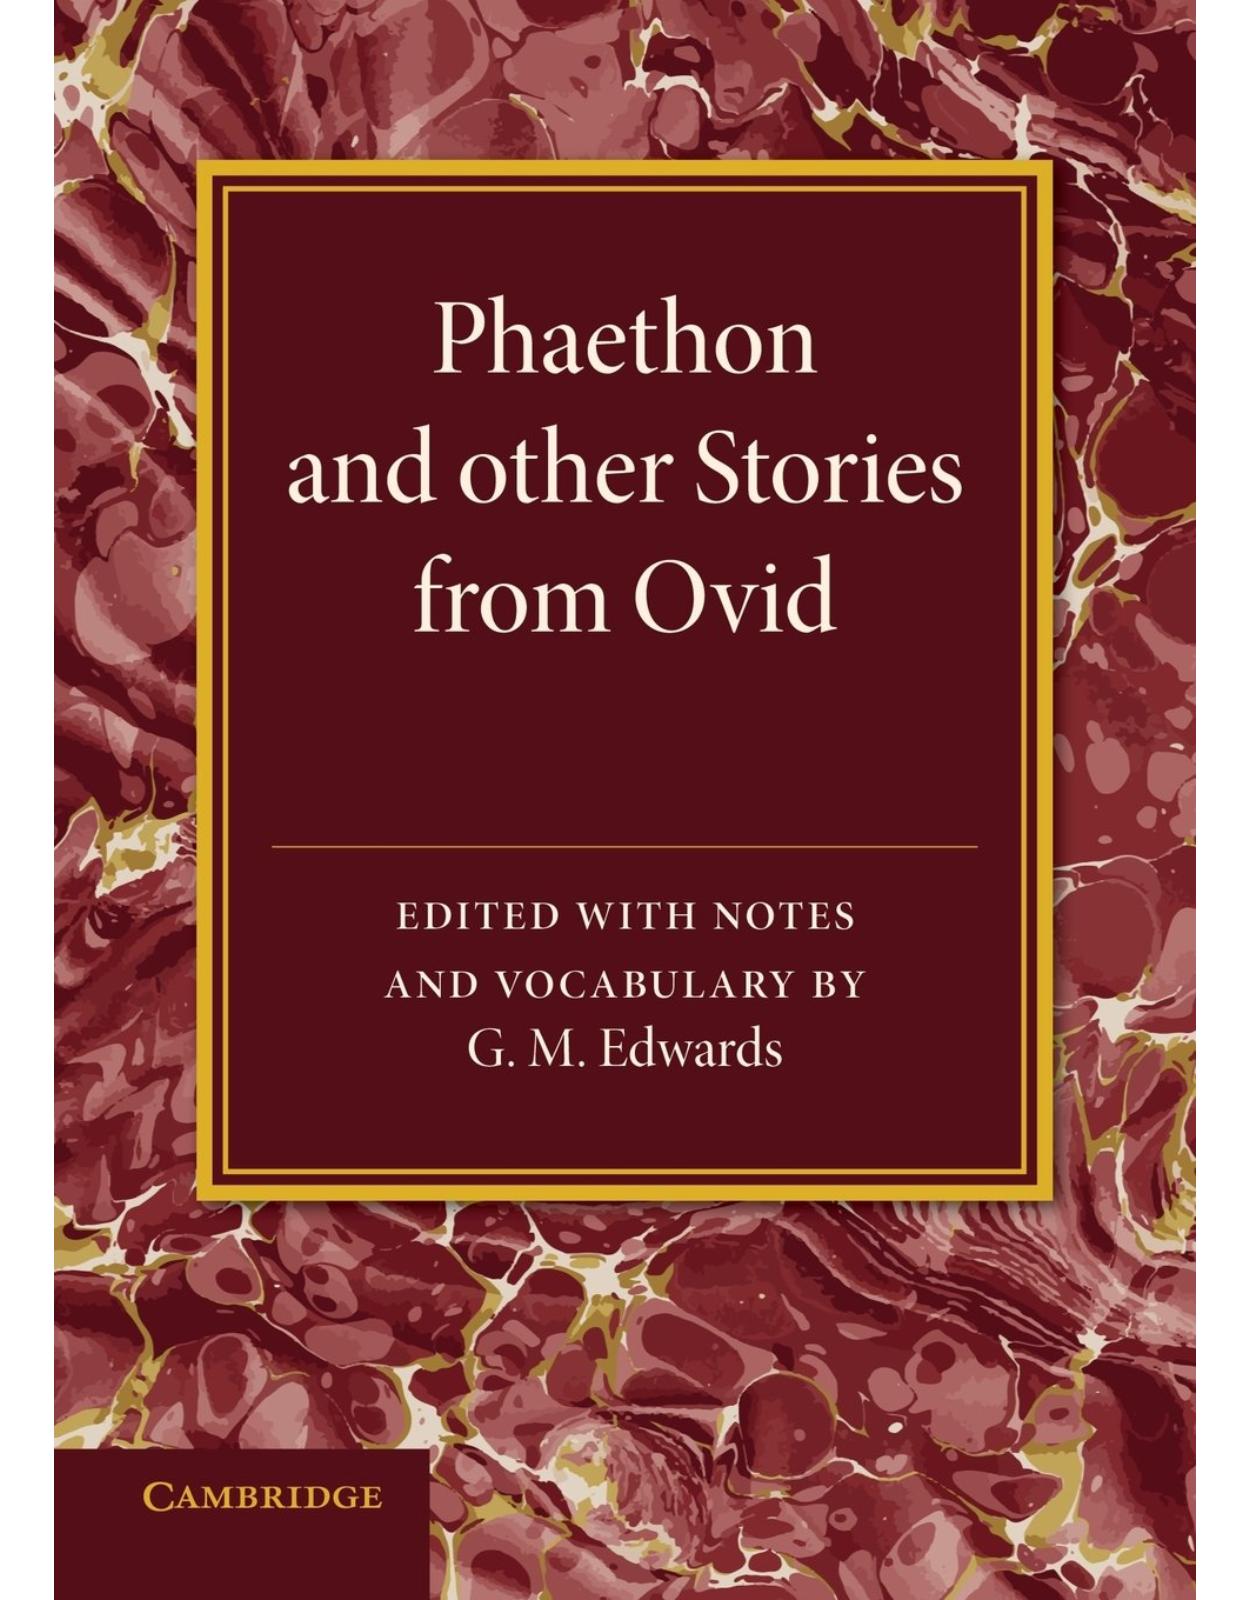 Phaethon and Other Stories from Ovid (Cambridge Elementary Classics: Latin)